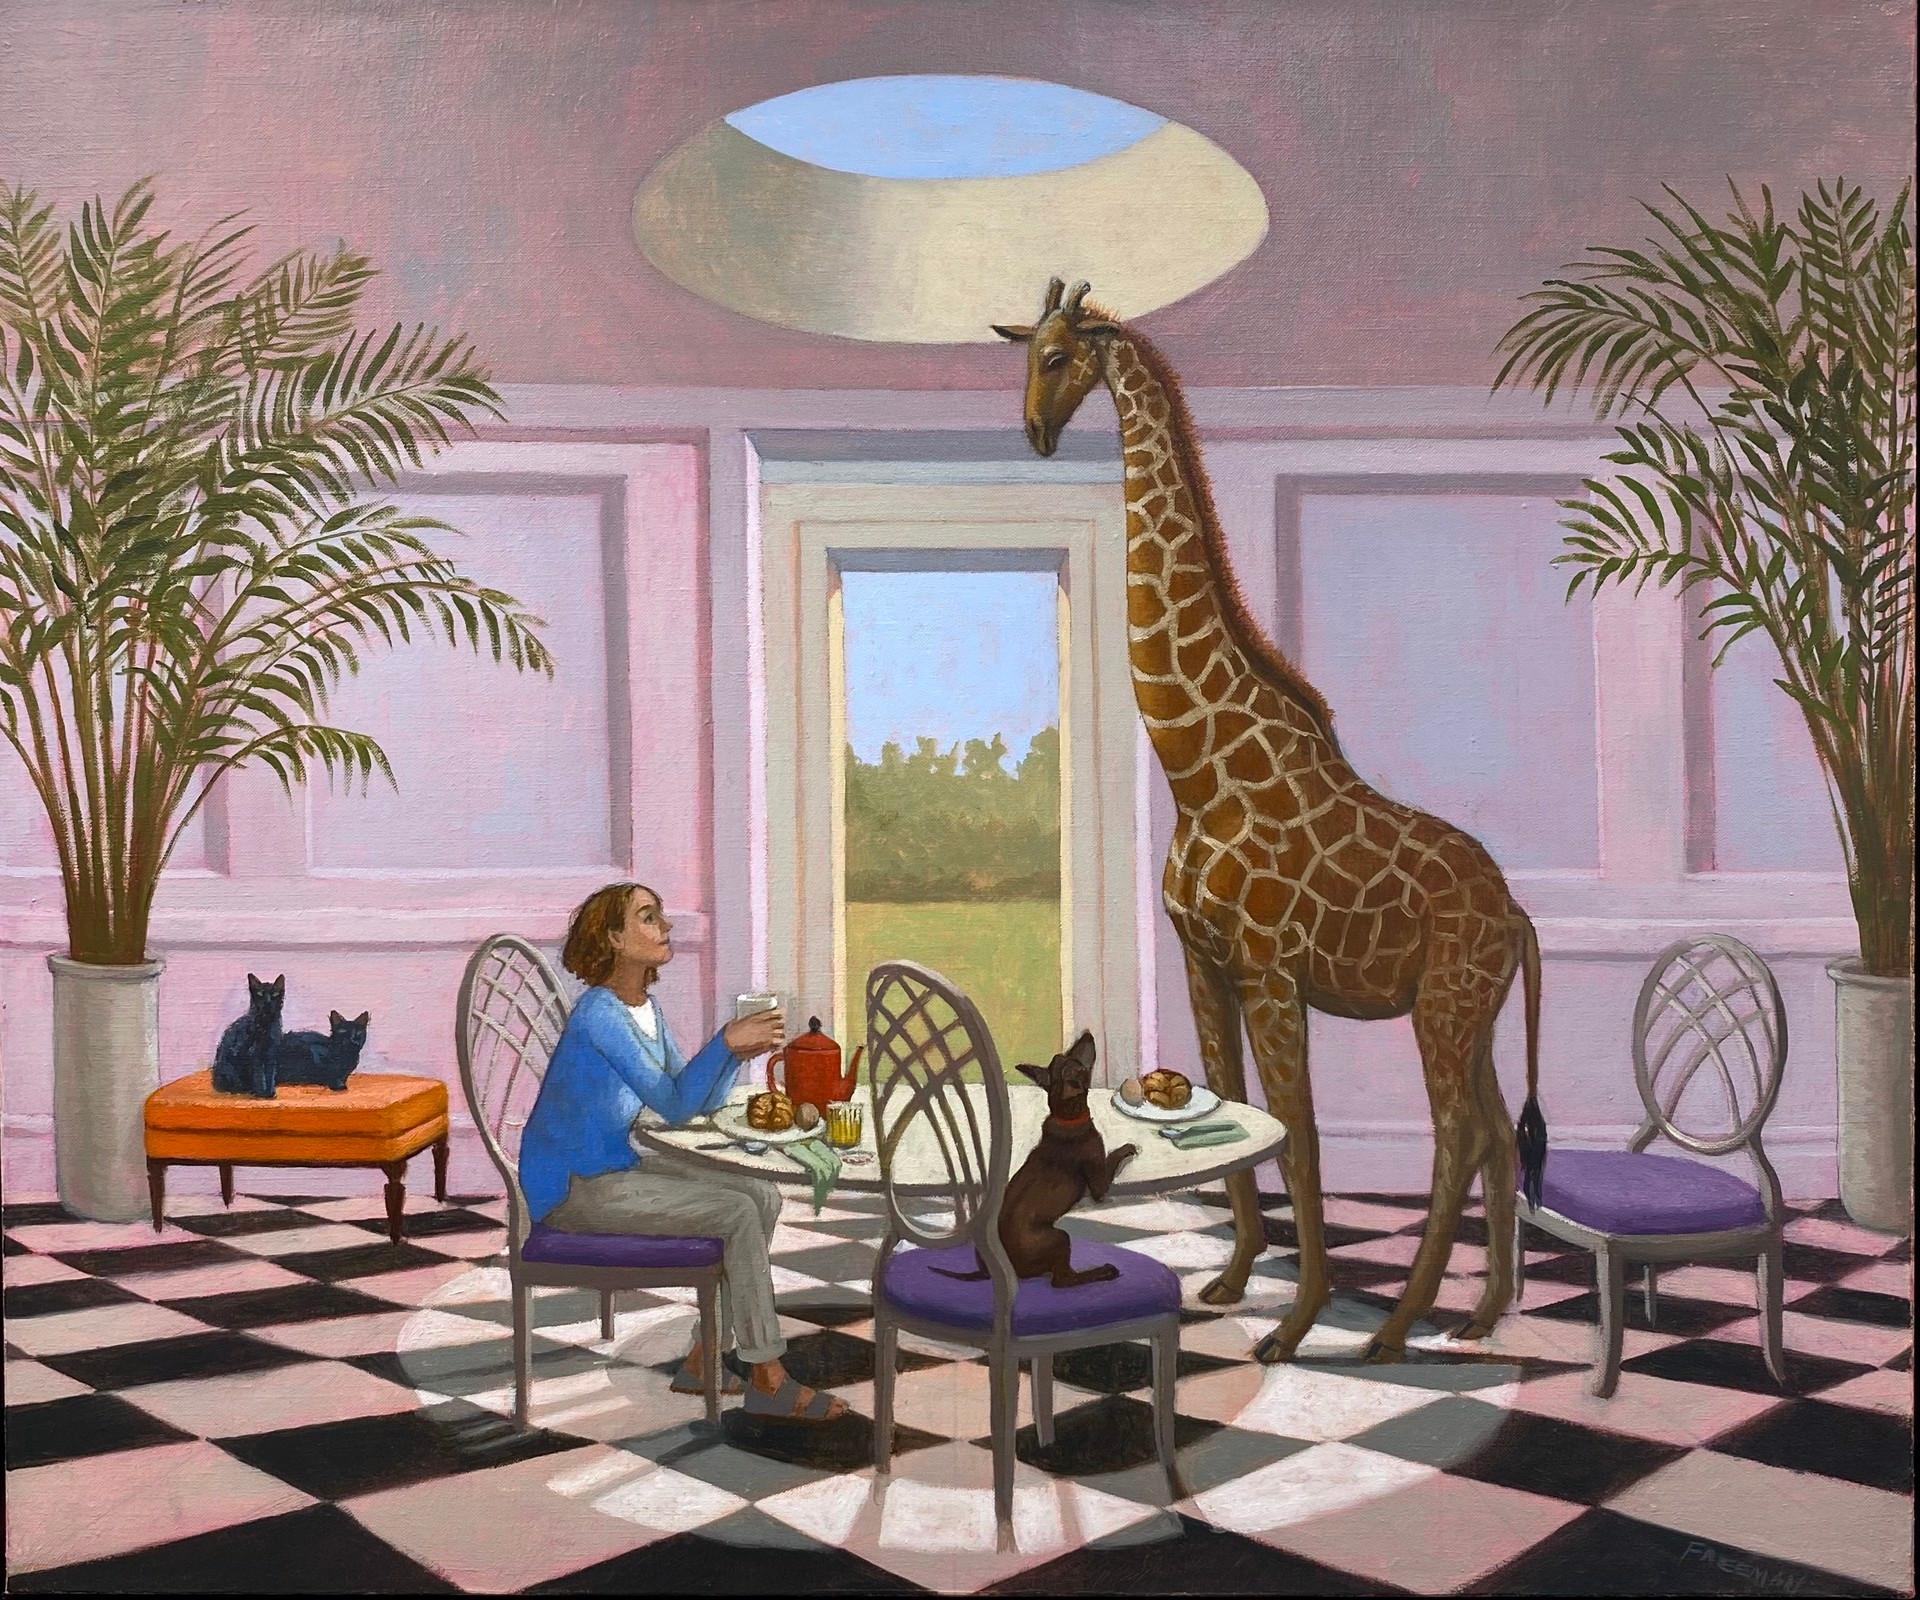 Kathryn Freeman Animal Painting - "Breakfast with a Giraffe", magical realism a girl, her dog, cats and a giraffe